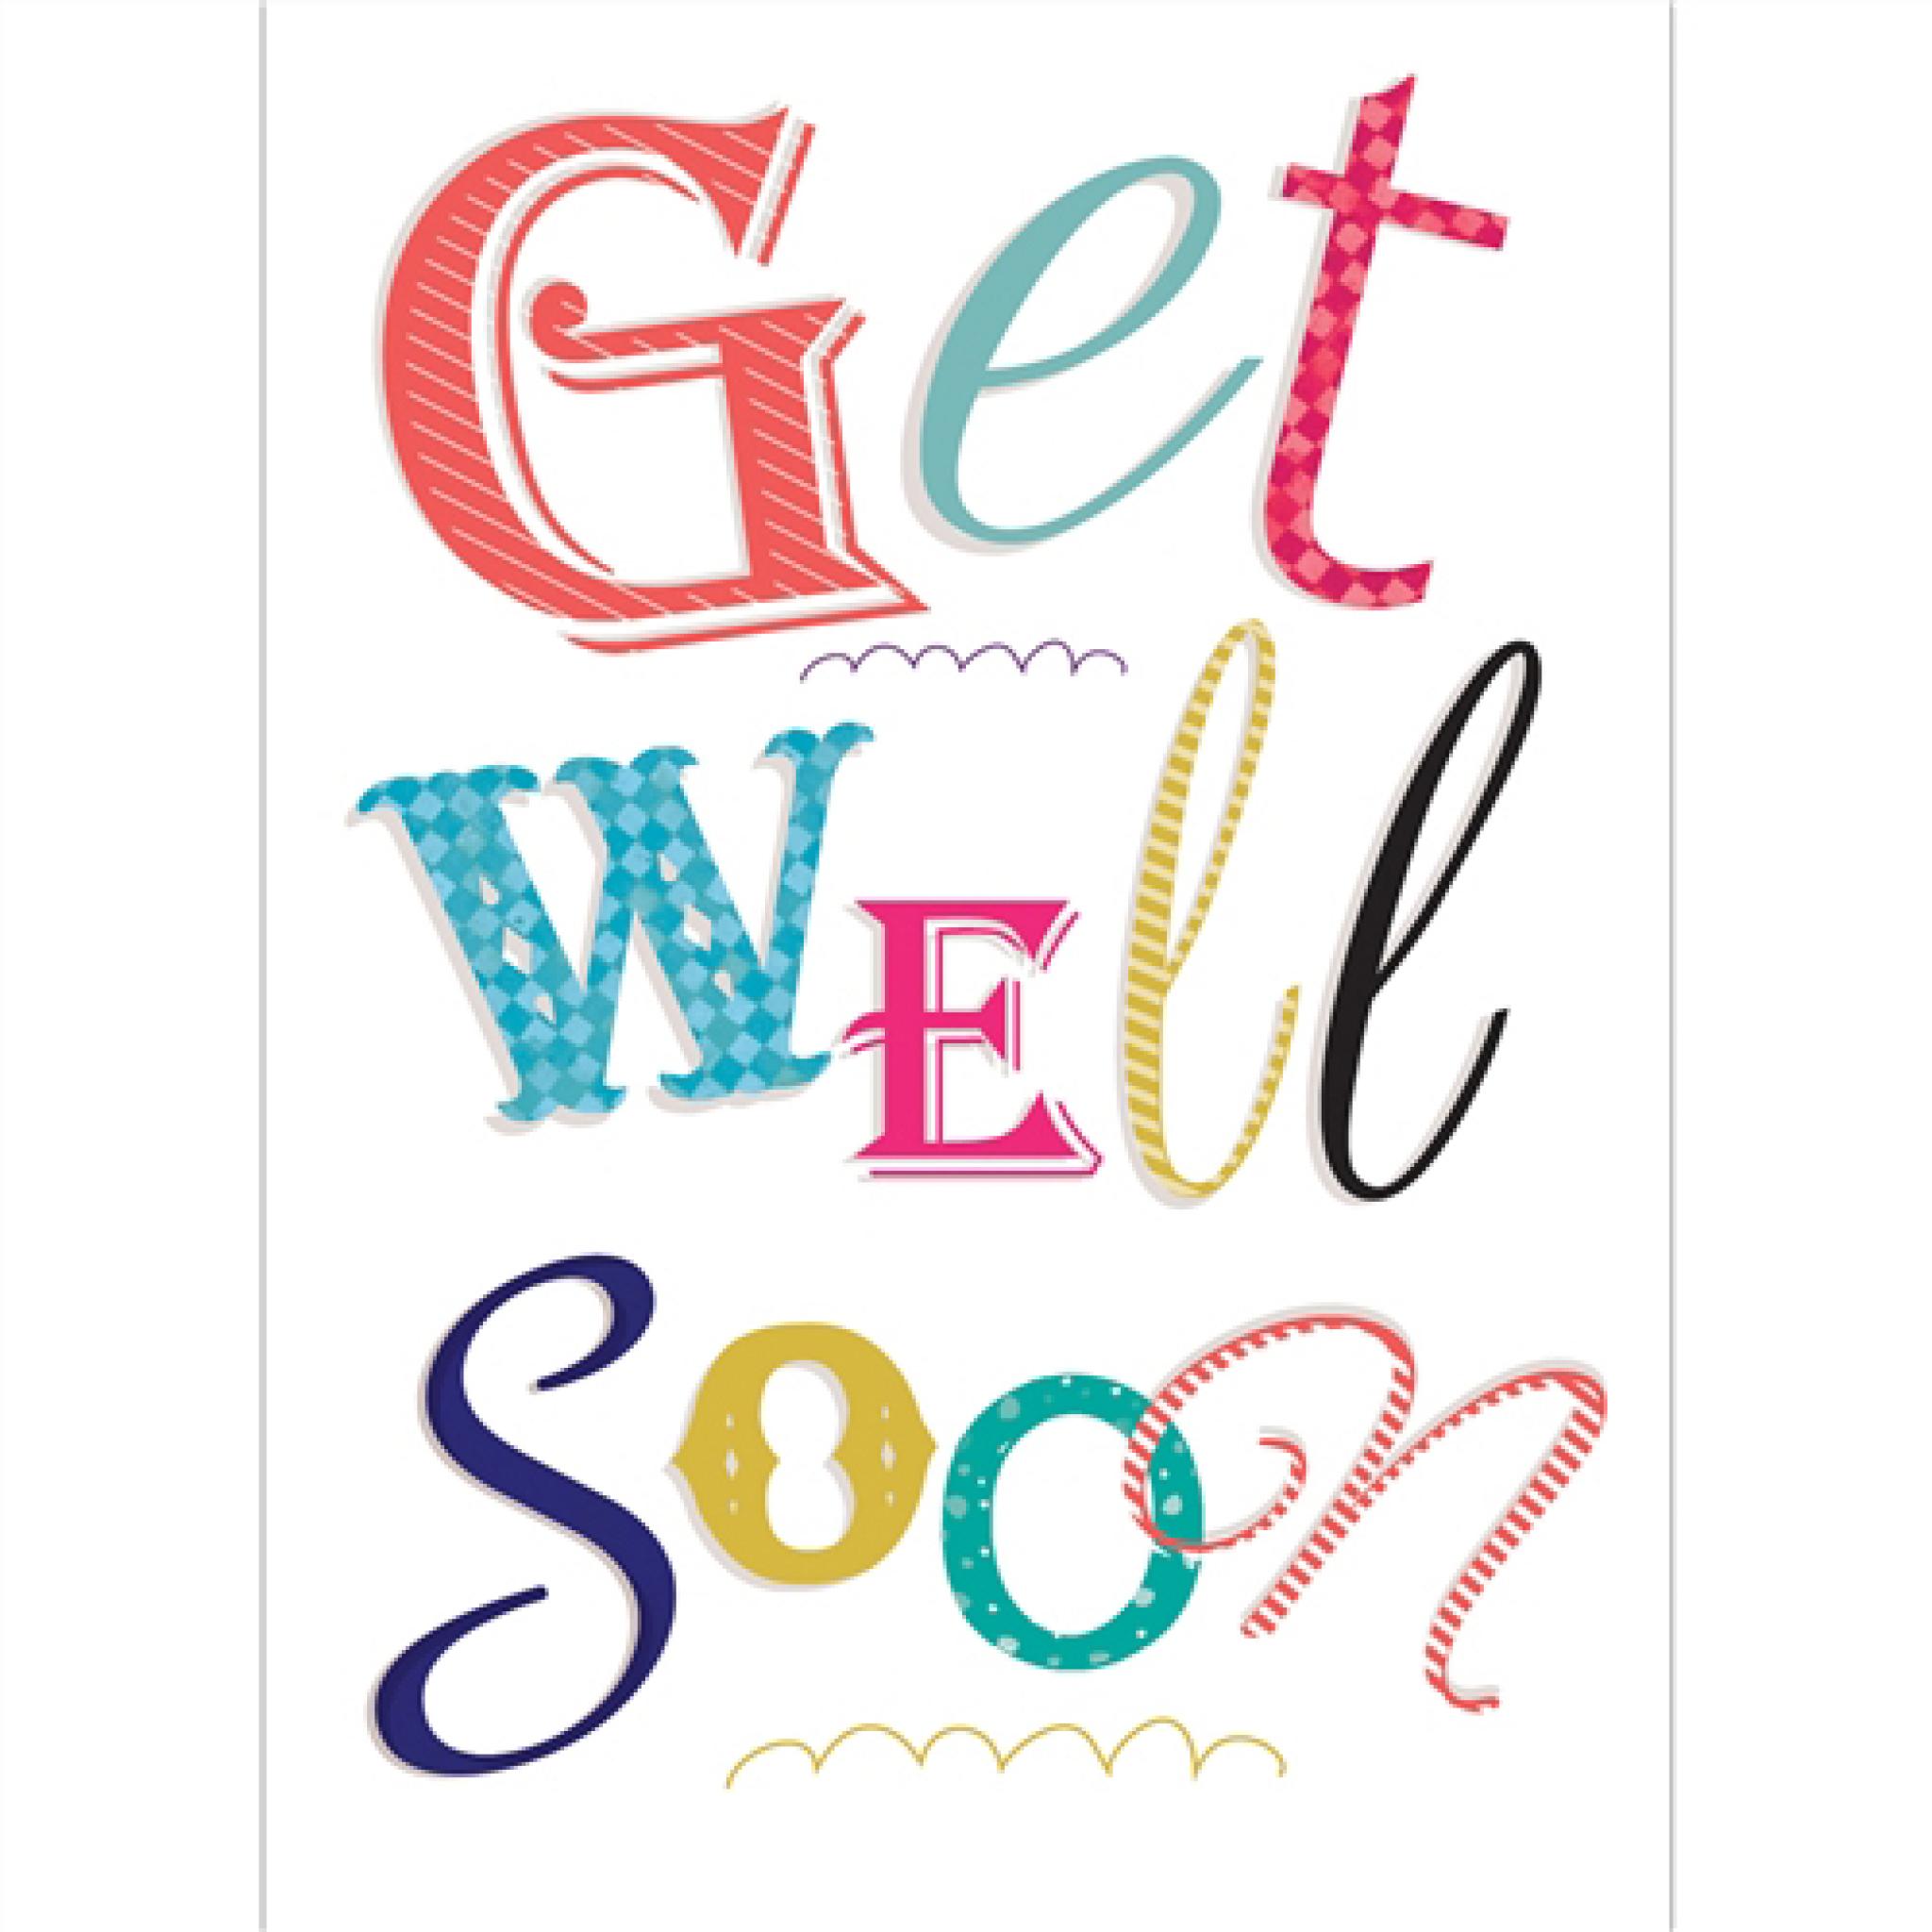 get-well-soon-card-text